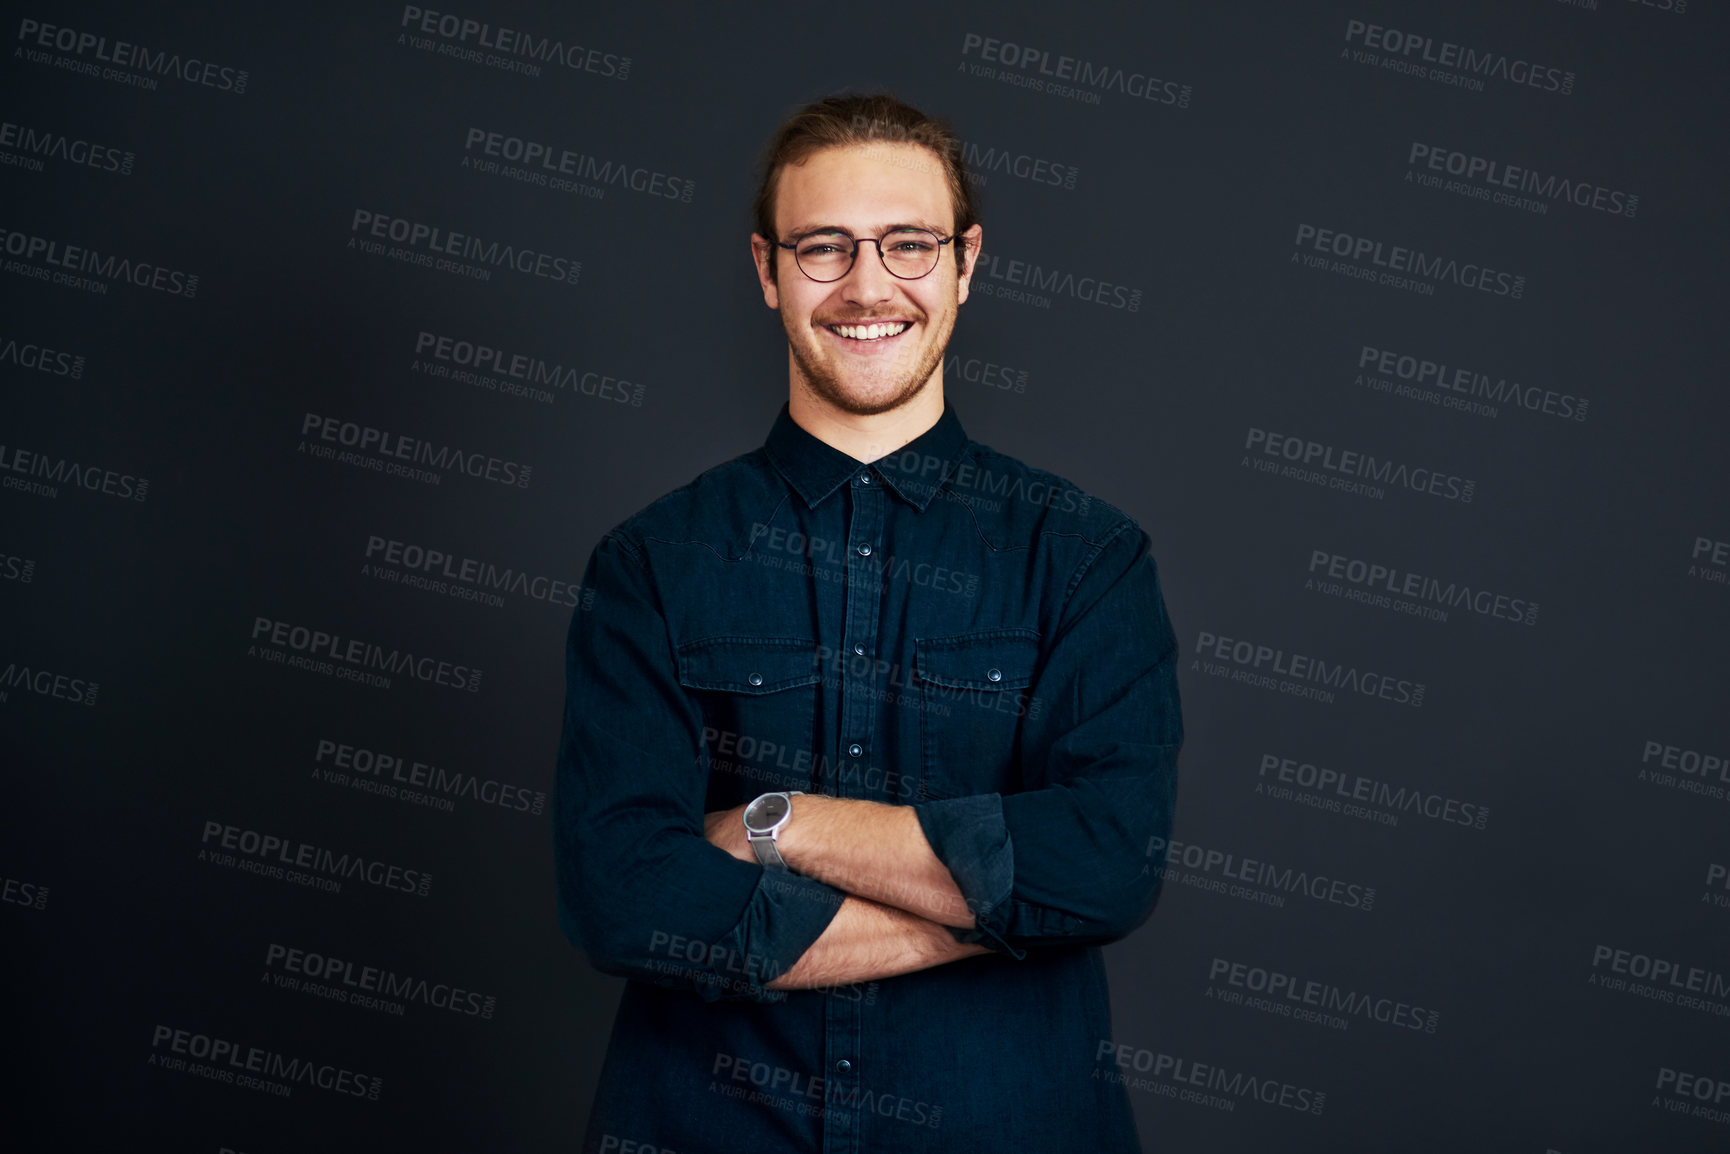 Buy stock photo Cropped portrait of a handsome young businessman standing alone with his arms folded against a black background in the studio